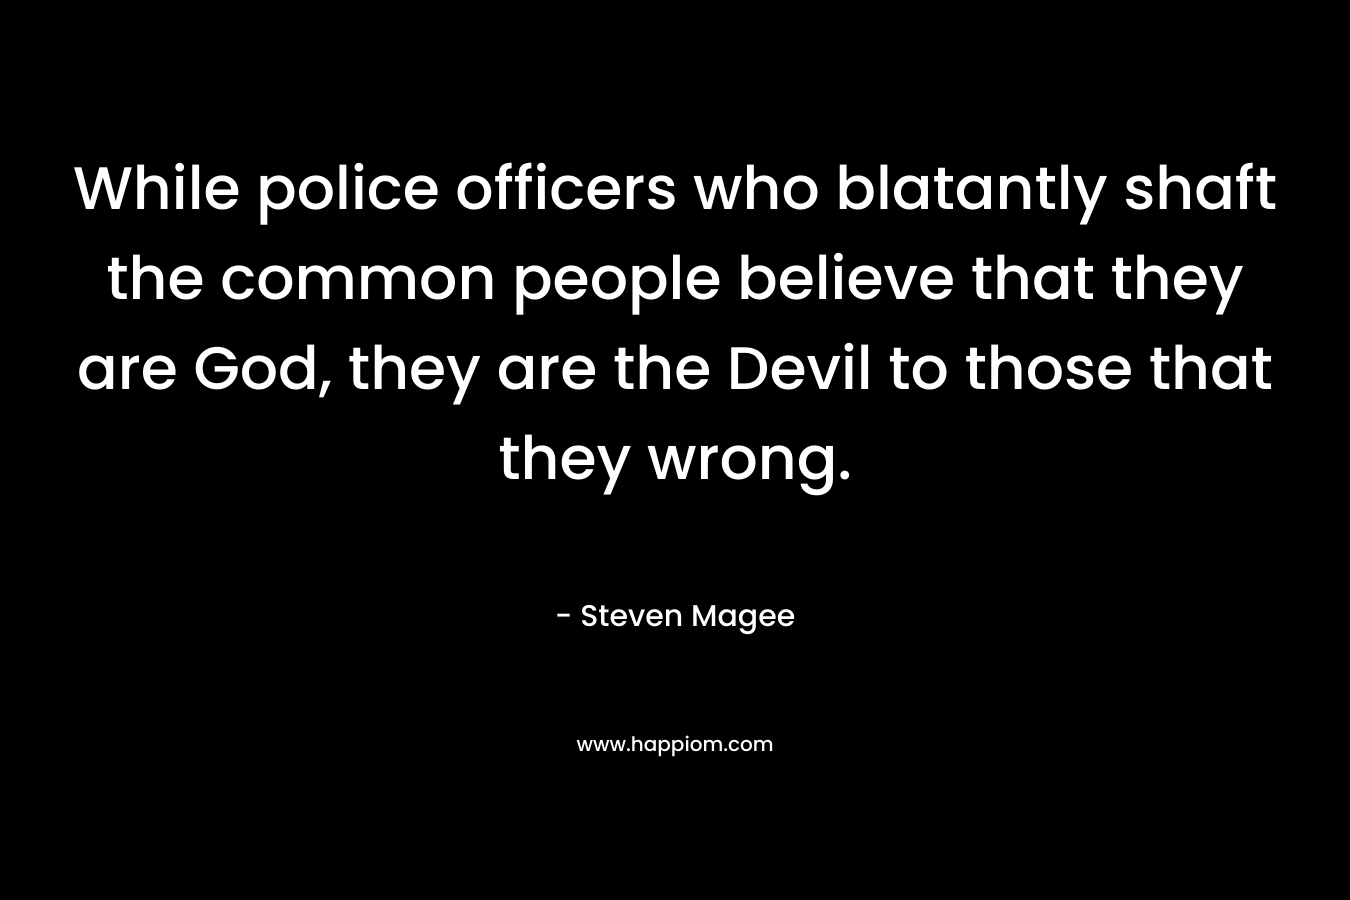 While police officers who blatantly shaft the common people believe that they are God, they are the Devil to those that they wrong. – Steven Magee